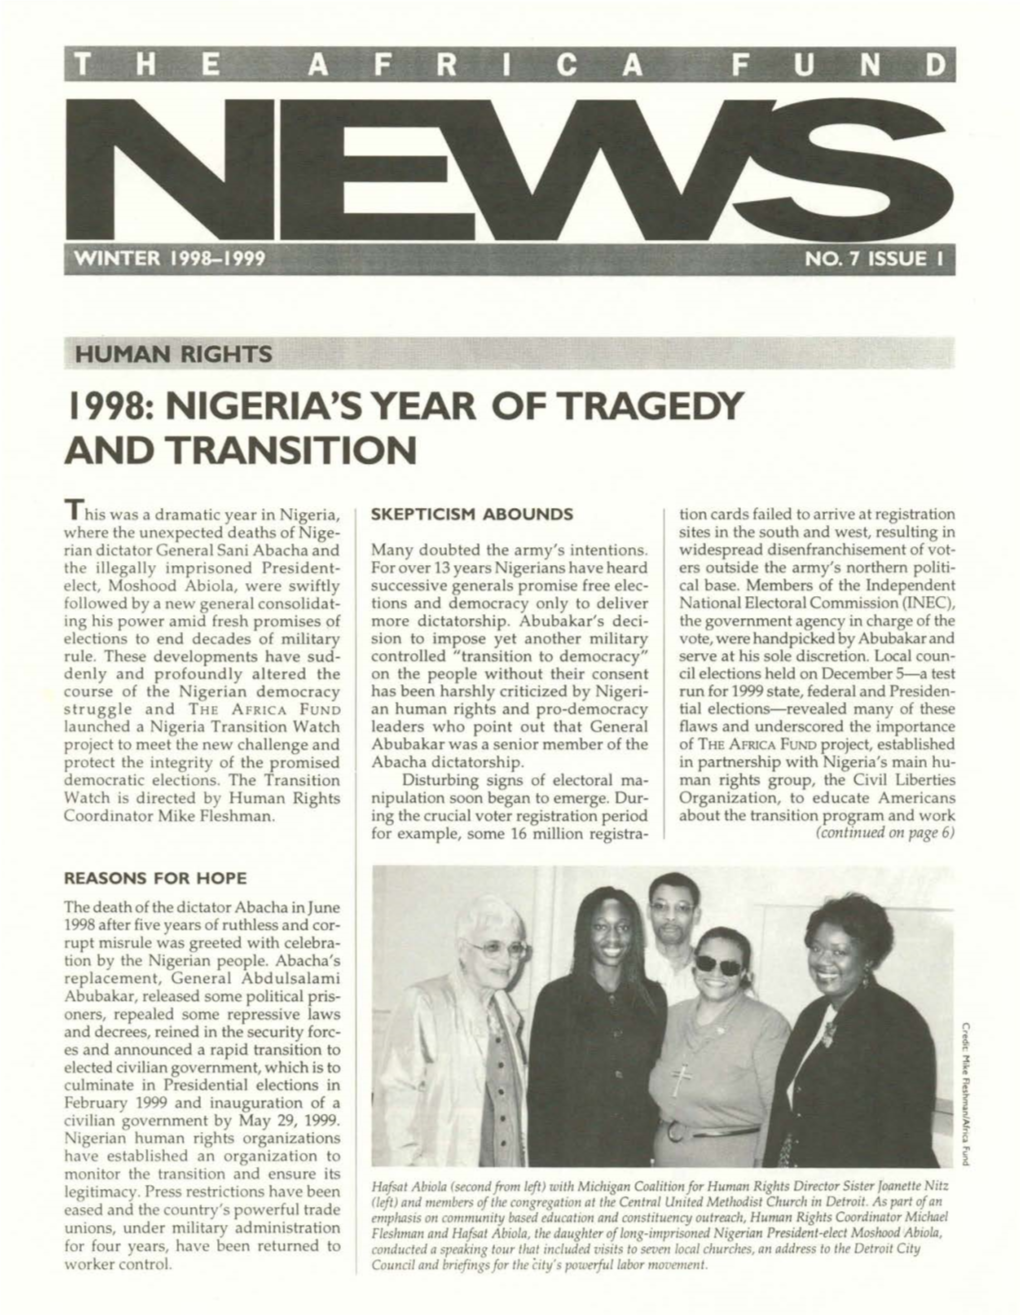 1998: Nigeria's Year of Tragedy and Transition